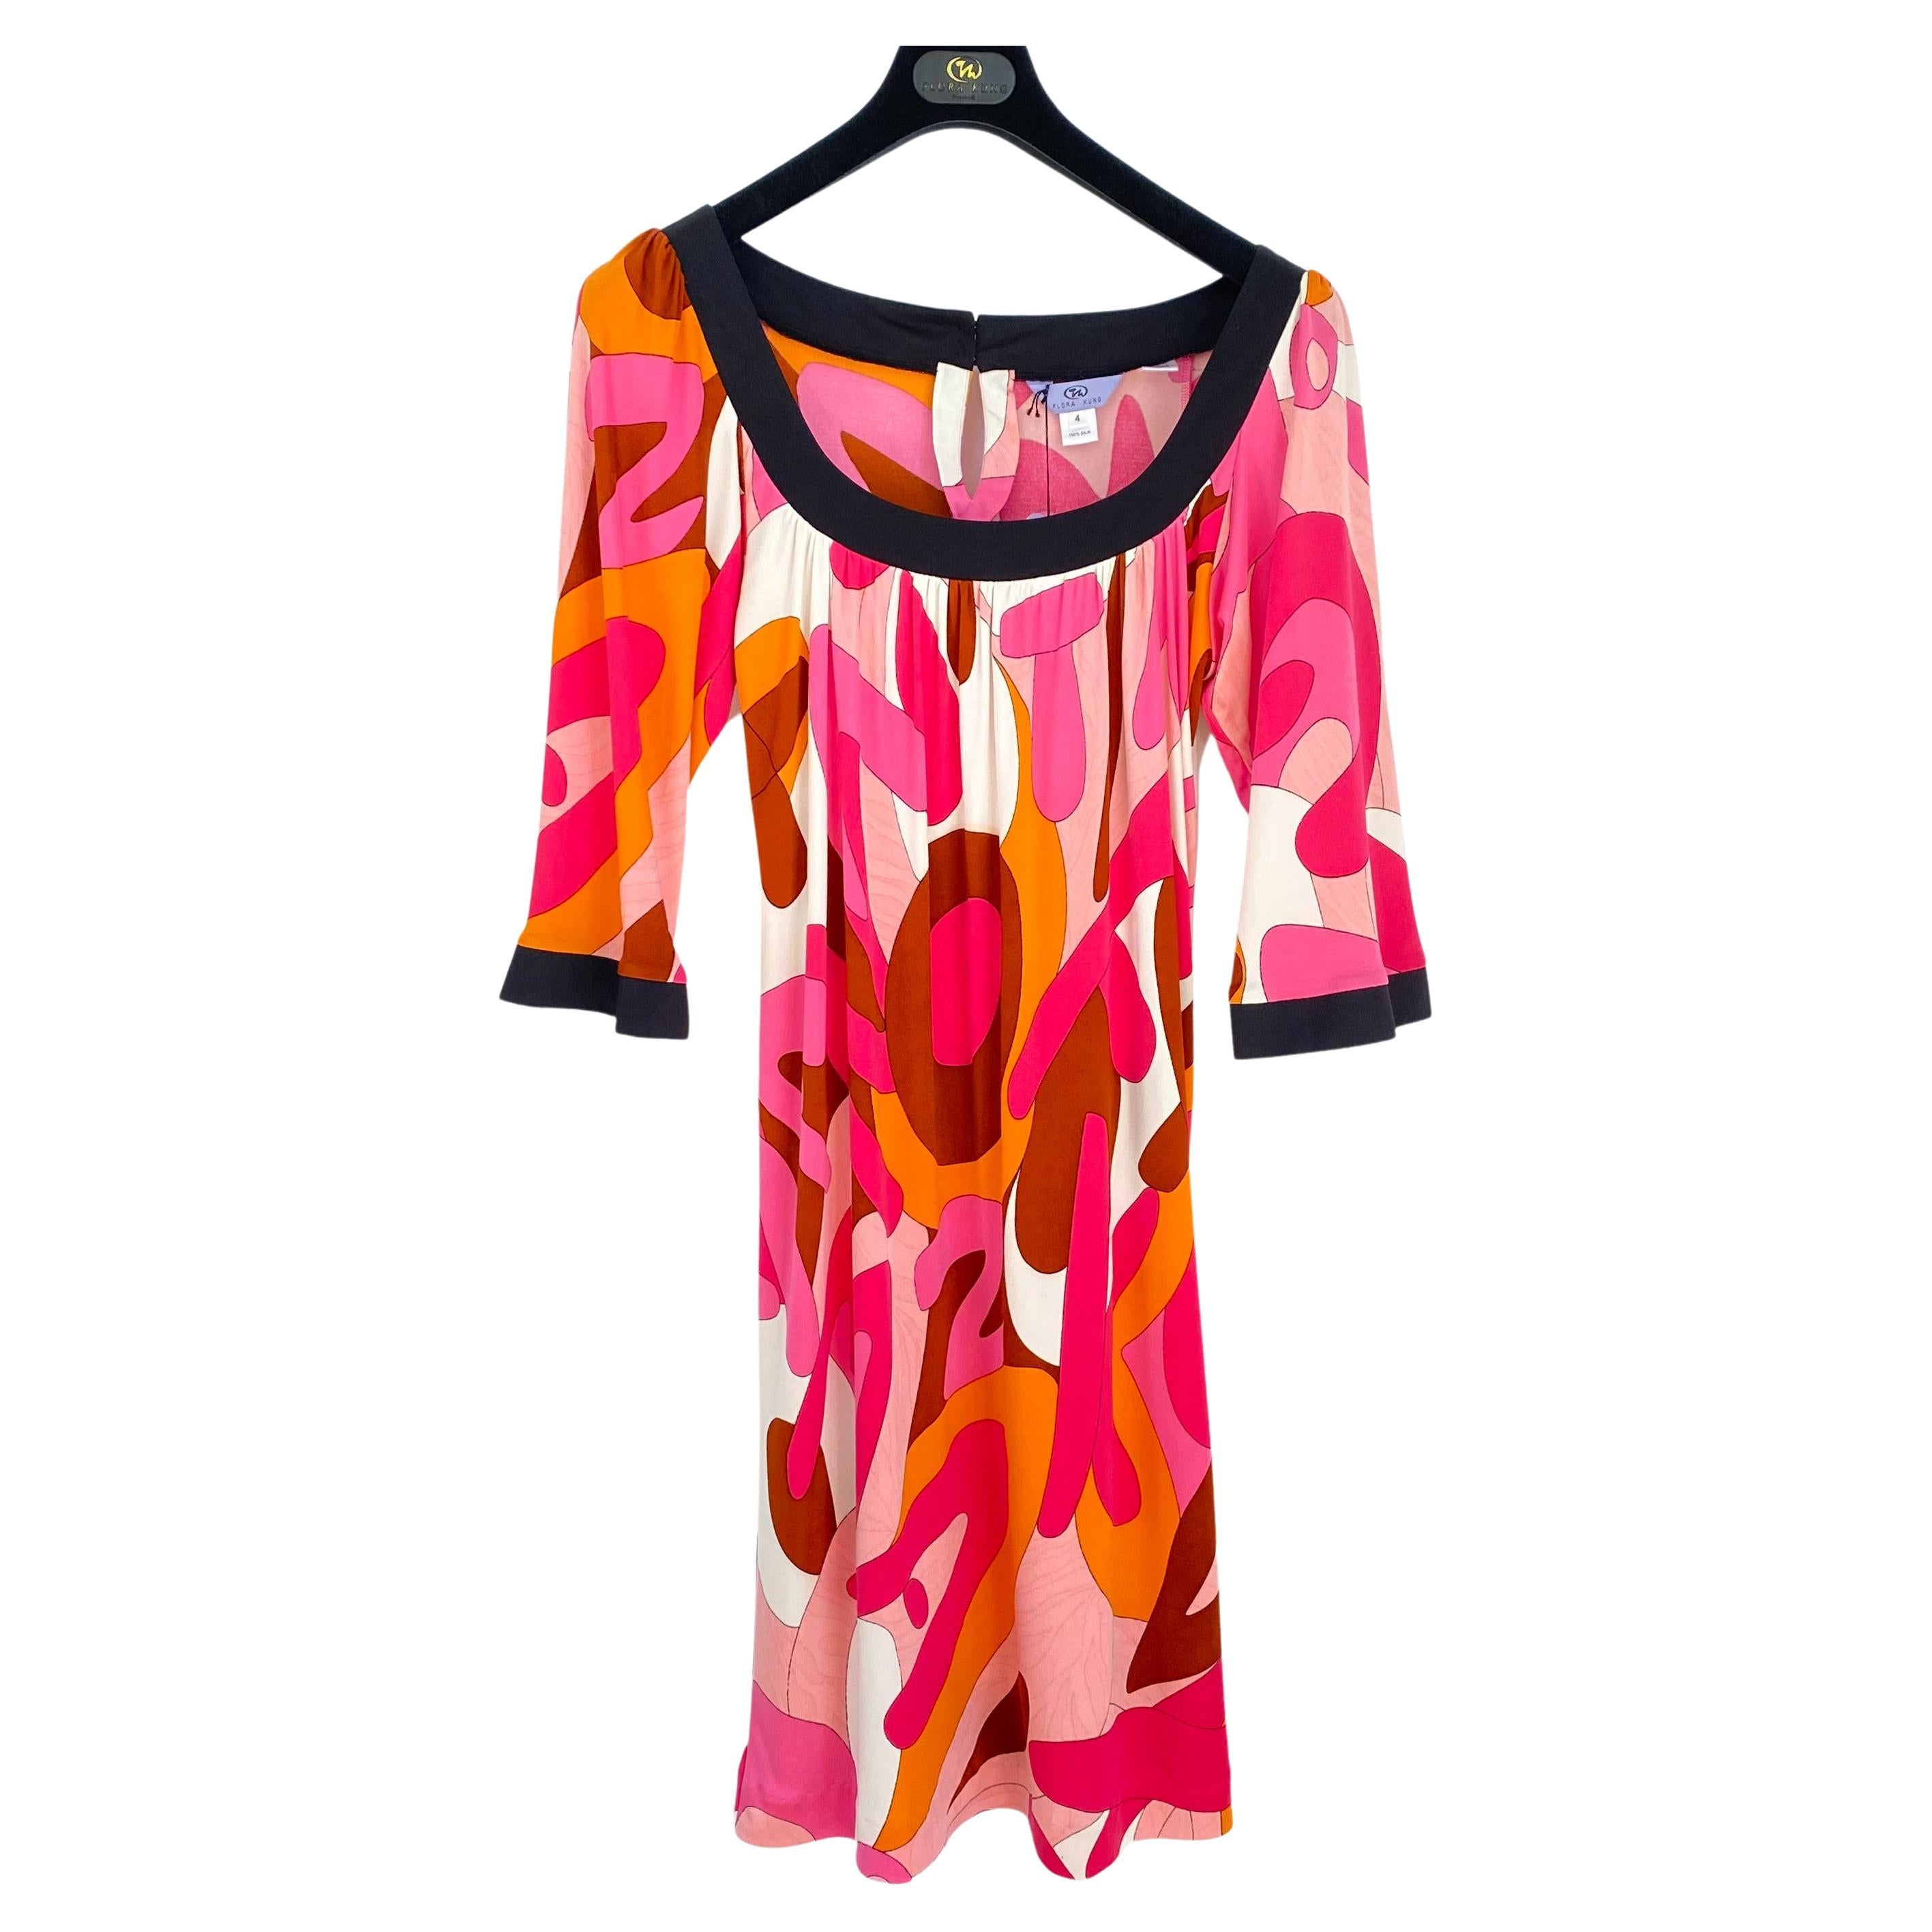 Flattering easy dress that can be dressed up or down.
(Psst ... This is the same FLORA KUNG dress that Kate Middleton wore to Annabel's London but in a different print) 
Approximately 38